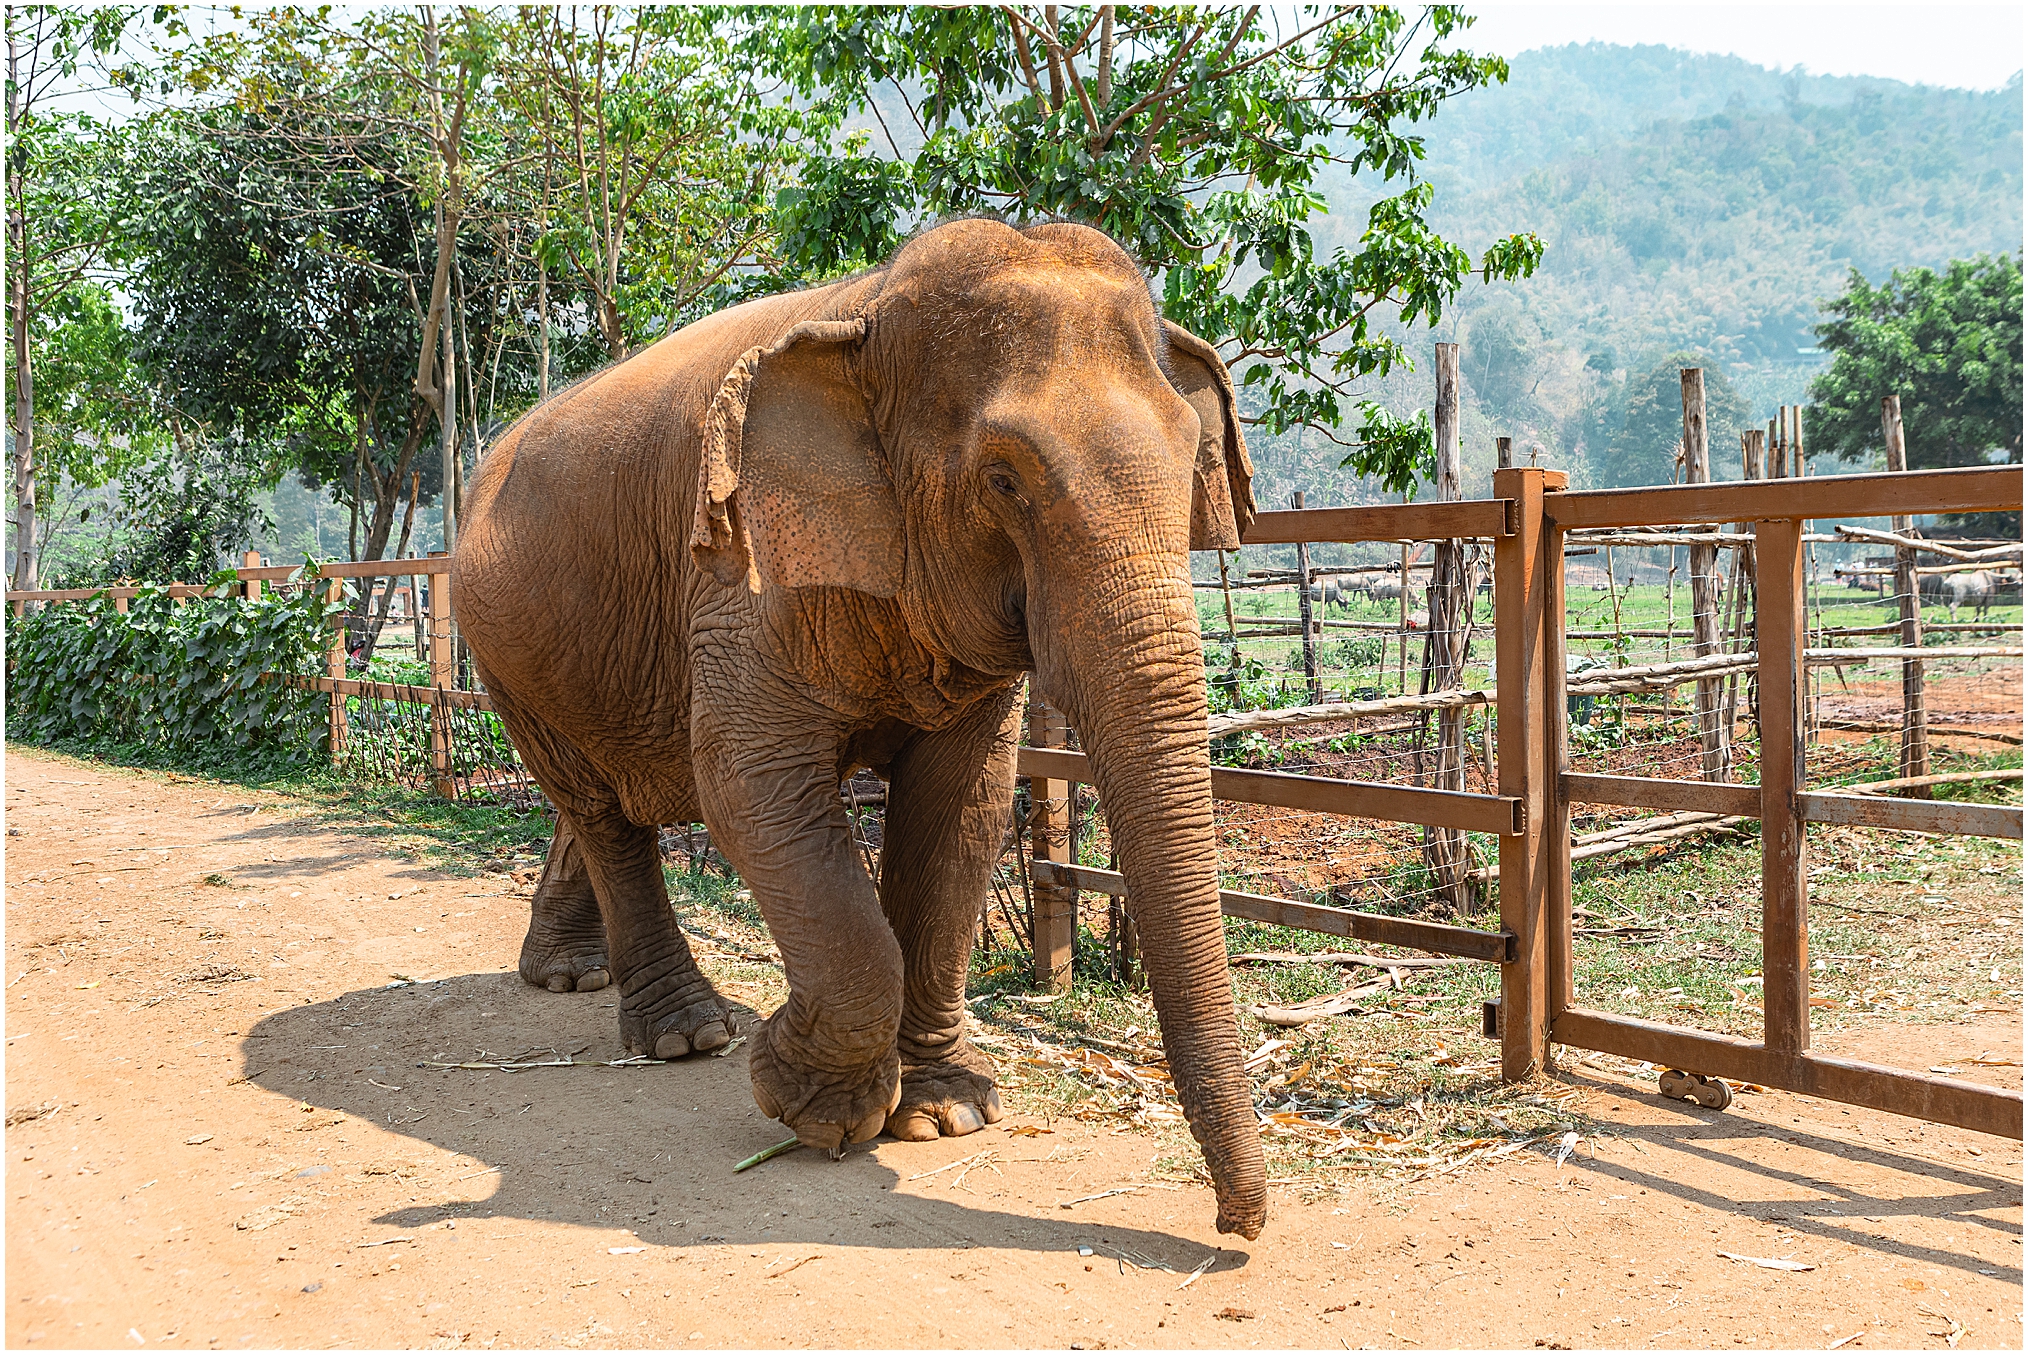 Elephant Nature Park: Ethical Vs Non-Ethical Animal Sanctuaries in Chiang Mai, Thailand